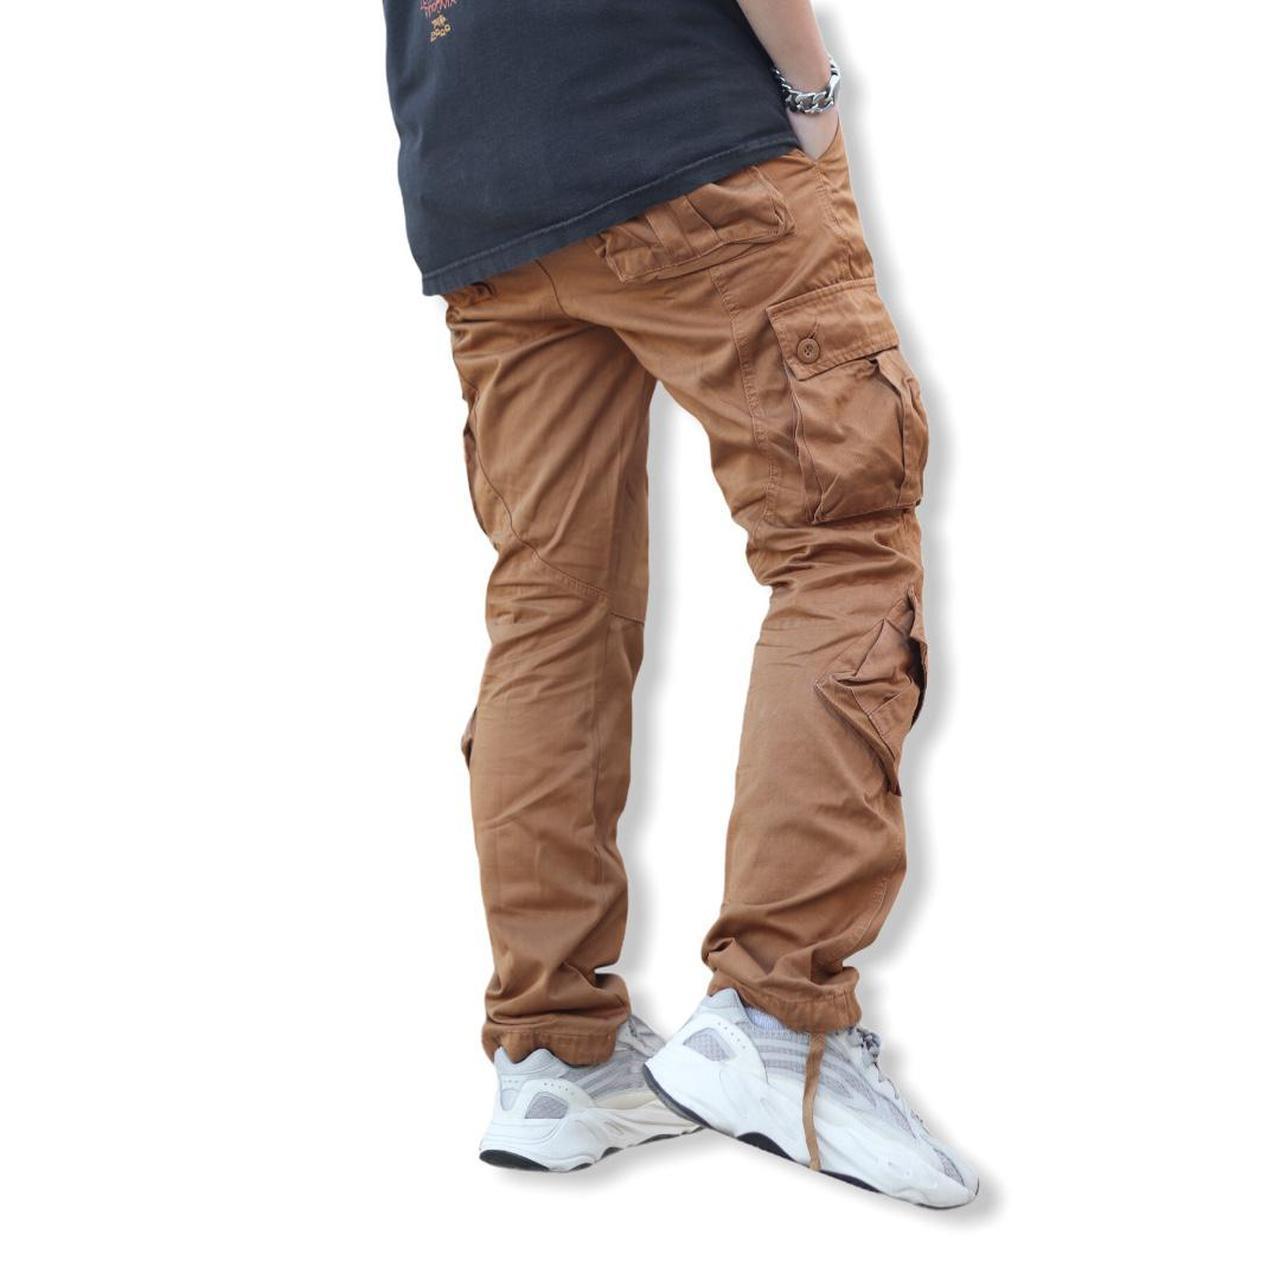 Product Image 3 - Cargo Pants Mustard
• Relax fit
•